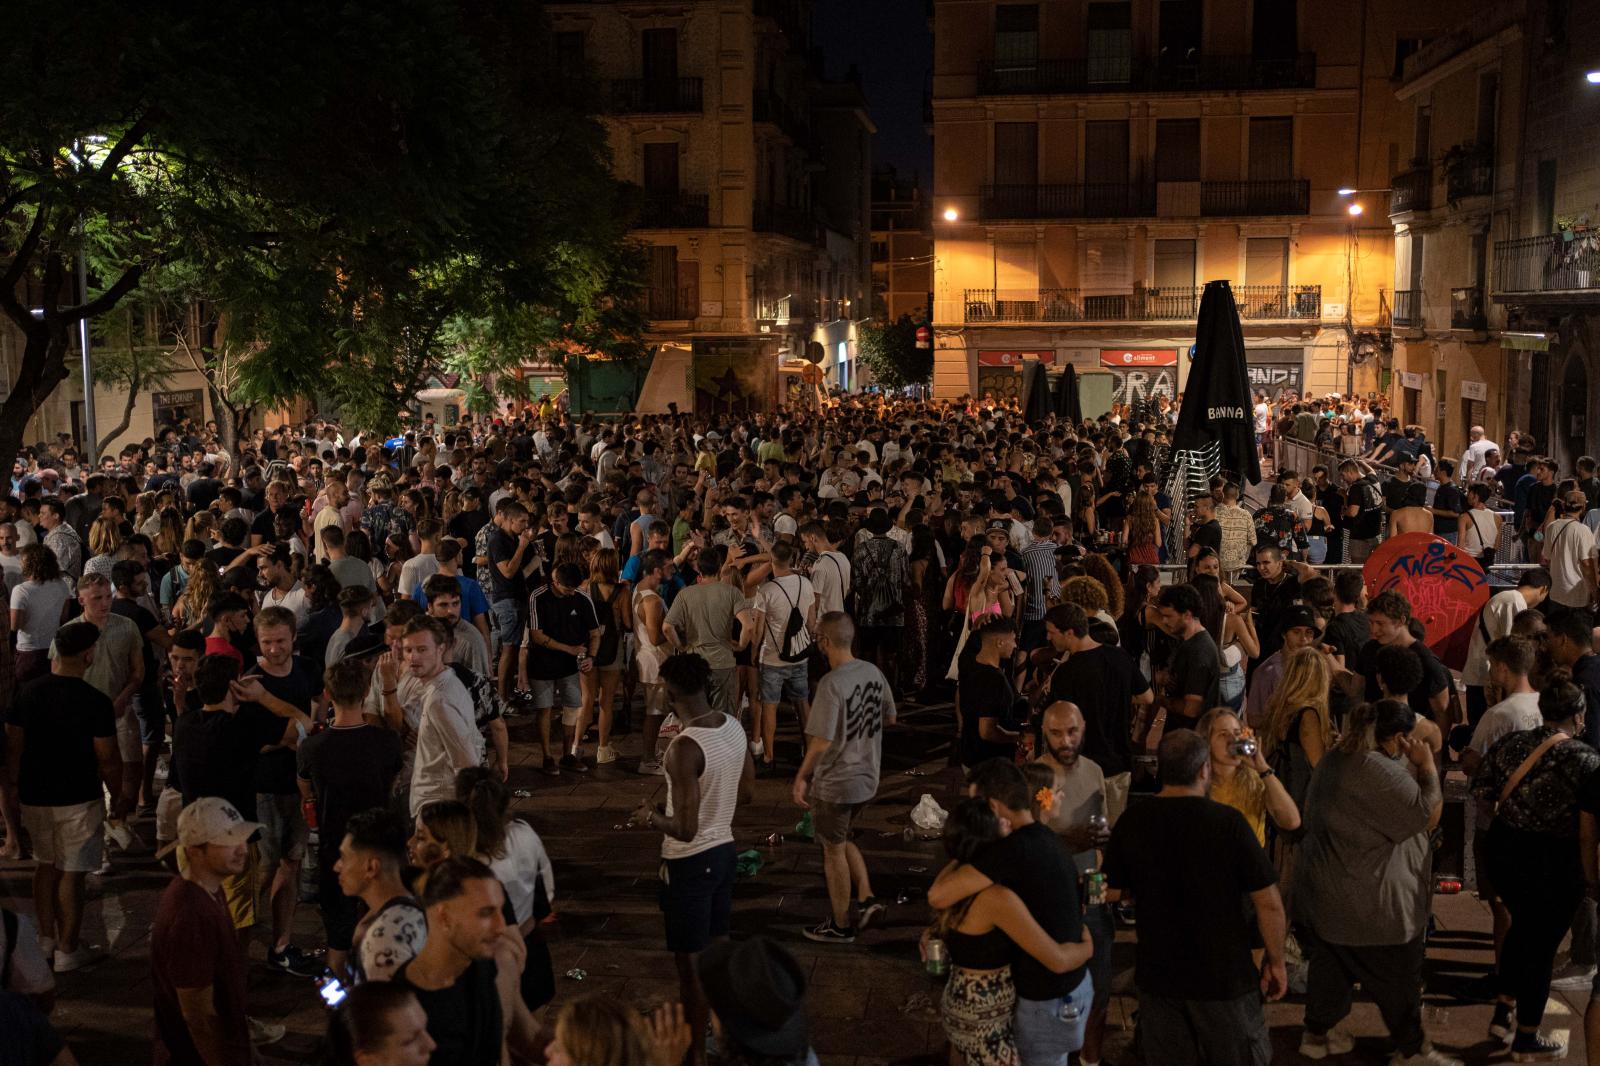 Image from Daily News - A night of crowds and drinking reunions in Barcelona...